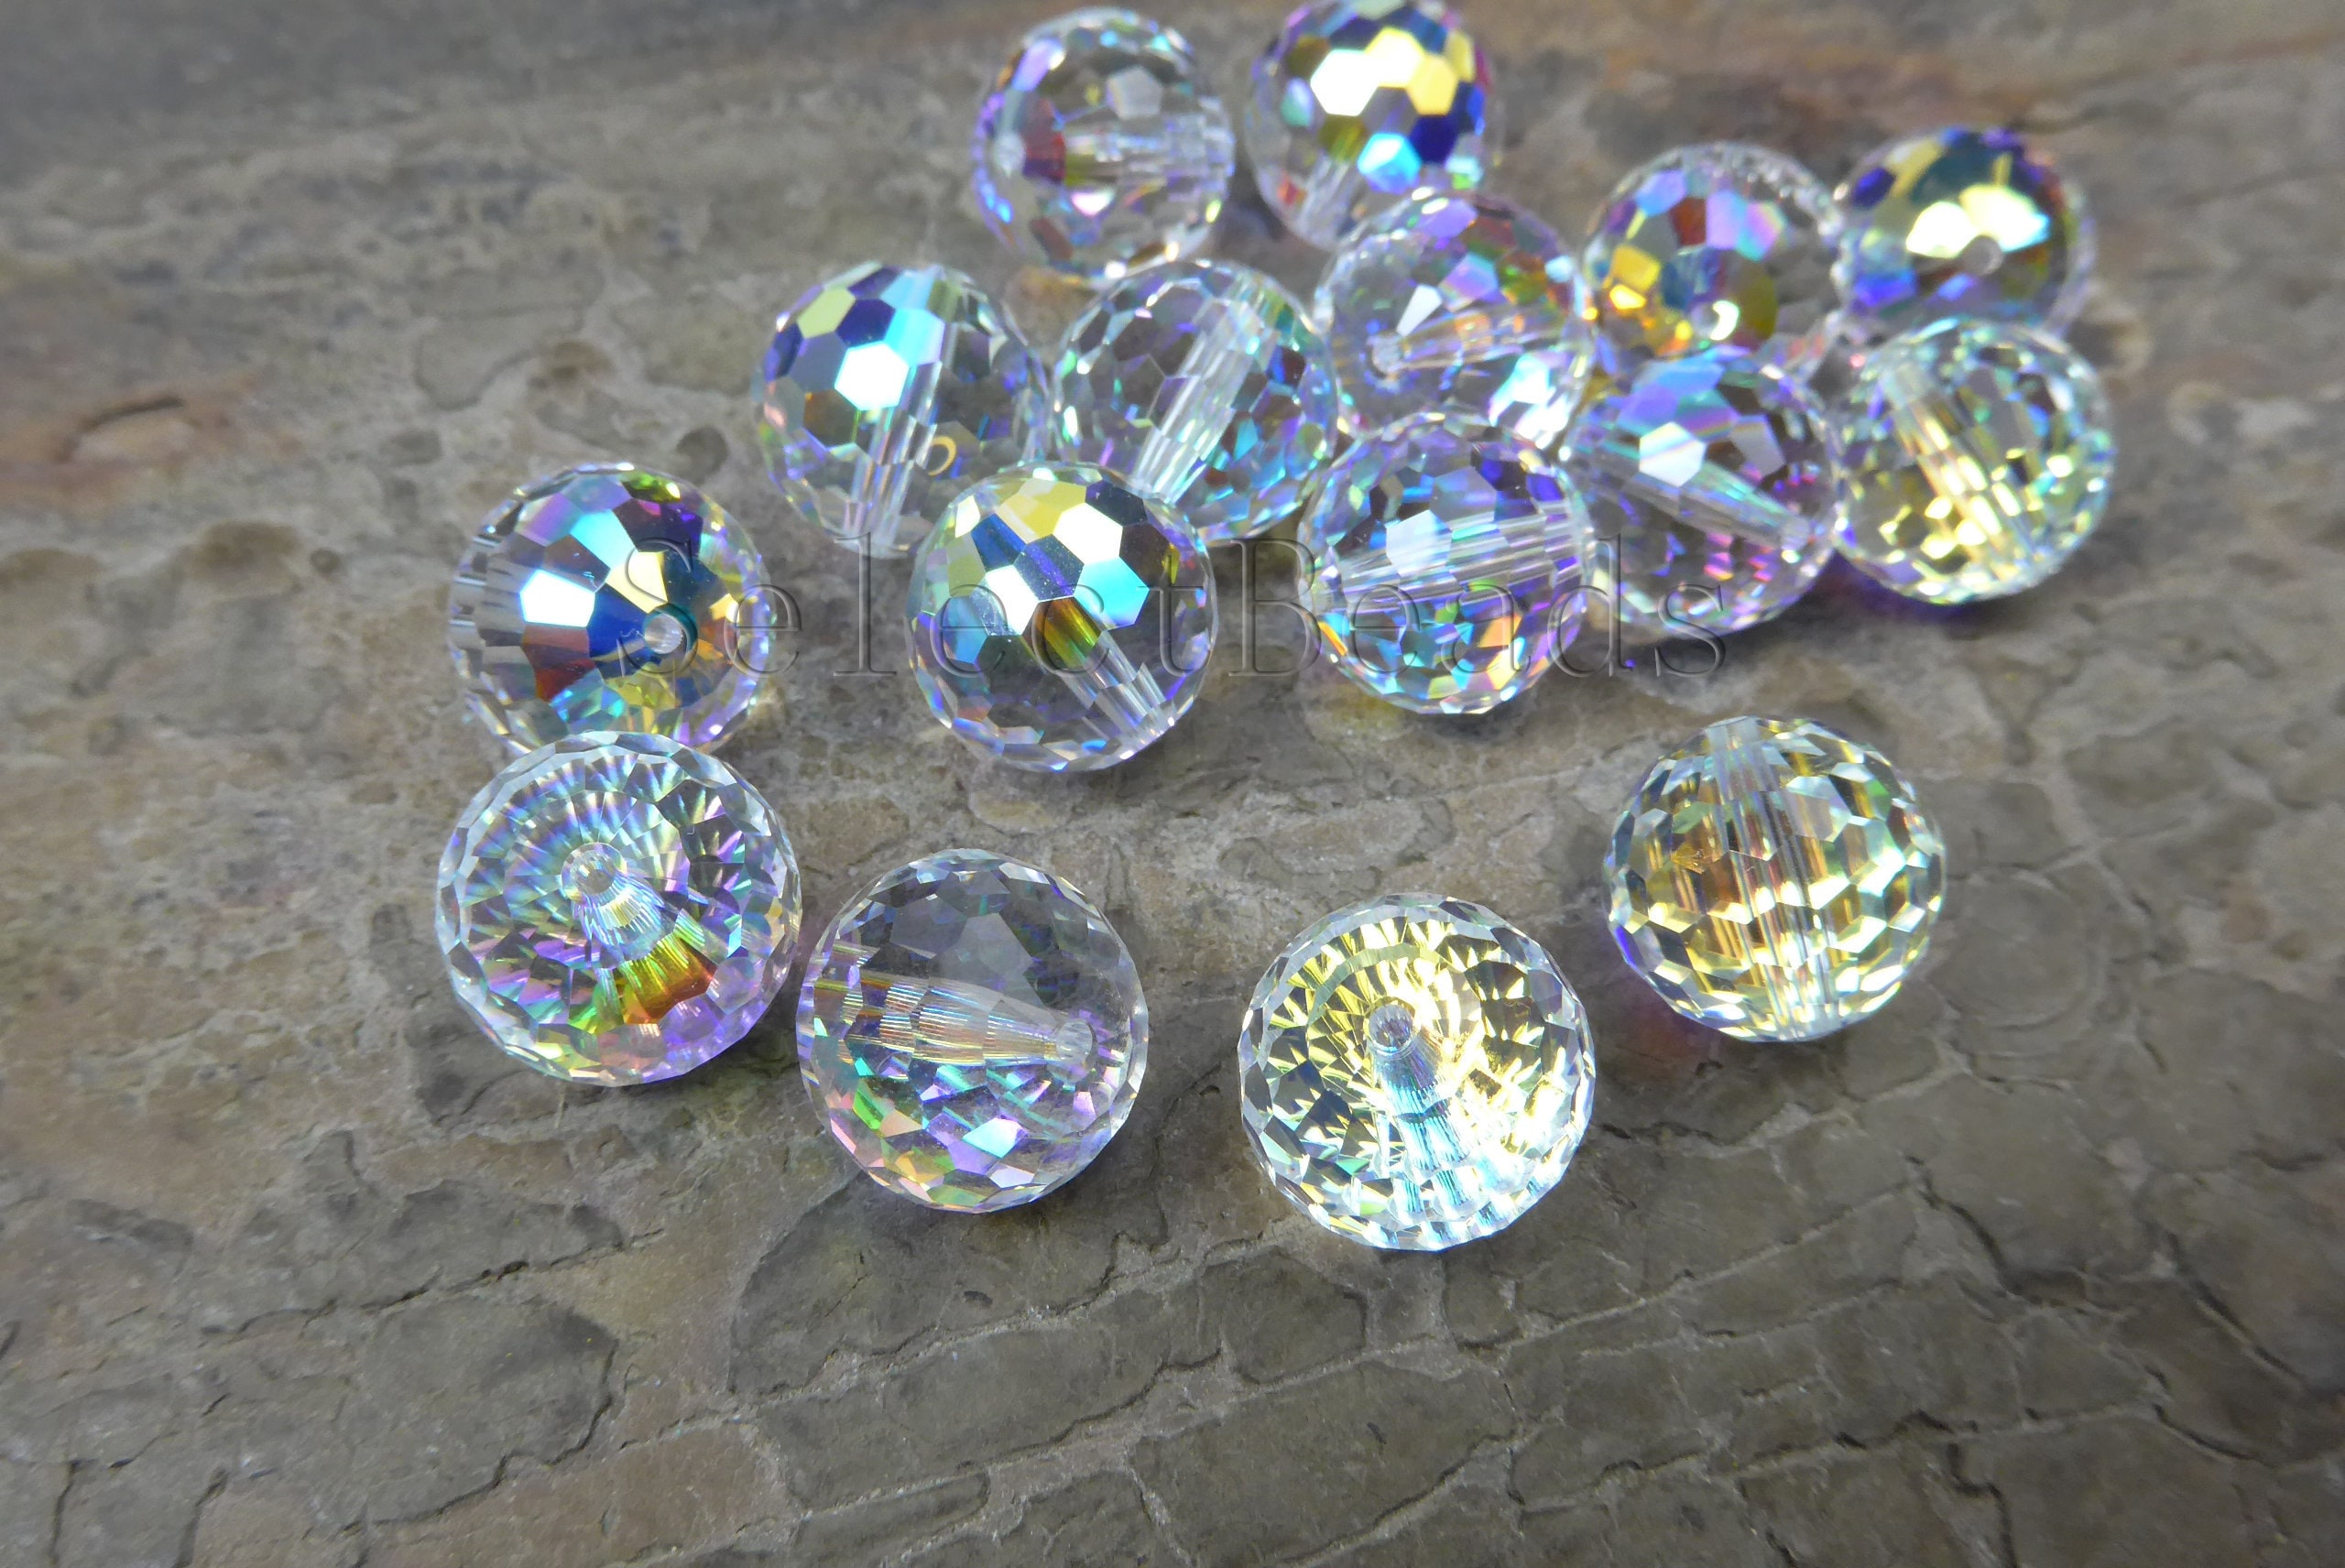 Swarovski Crystal Beads Faceted Round Beads AB Coated Crystal Beads Clear  Wedding Beads Jewelry Making Crystal Loose Bead 4pcs 